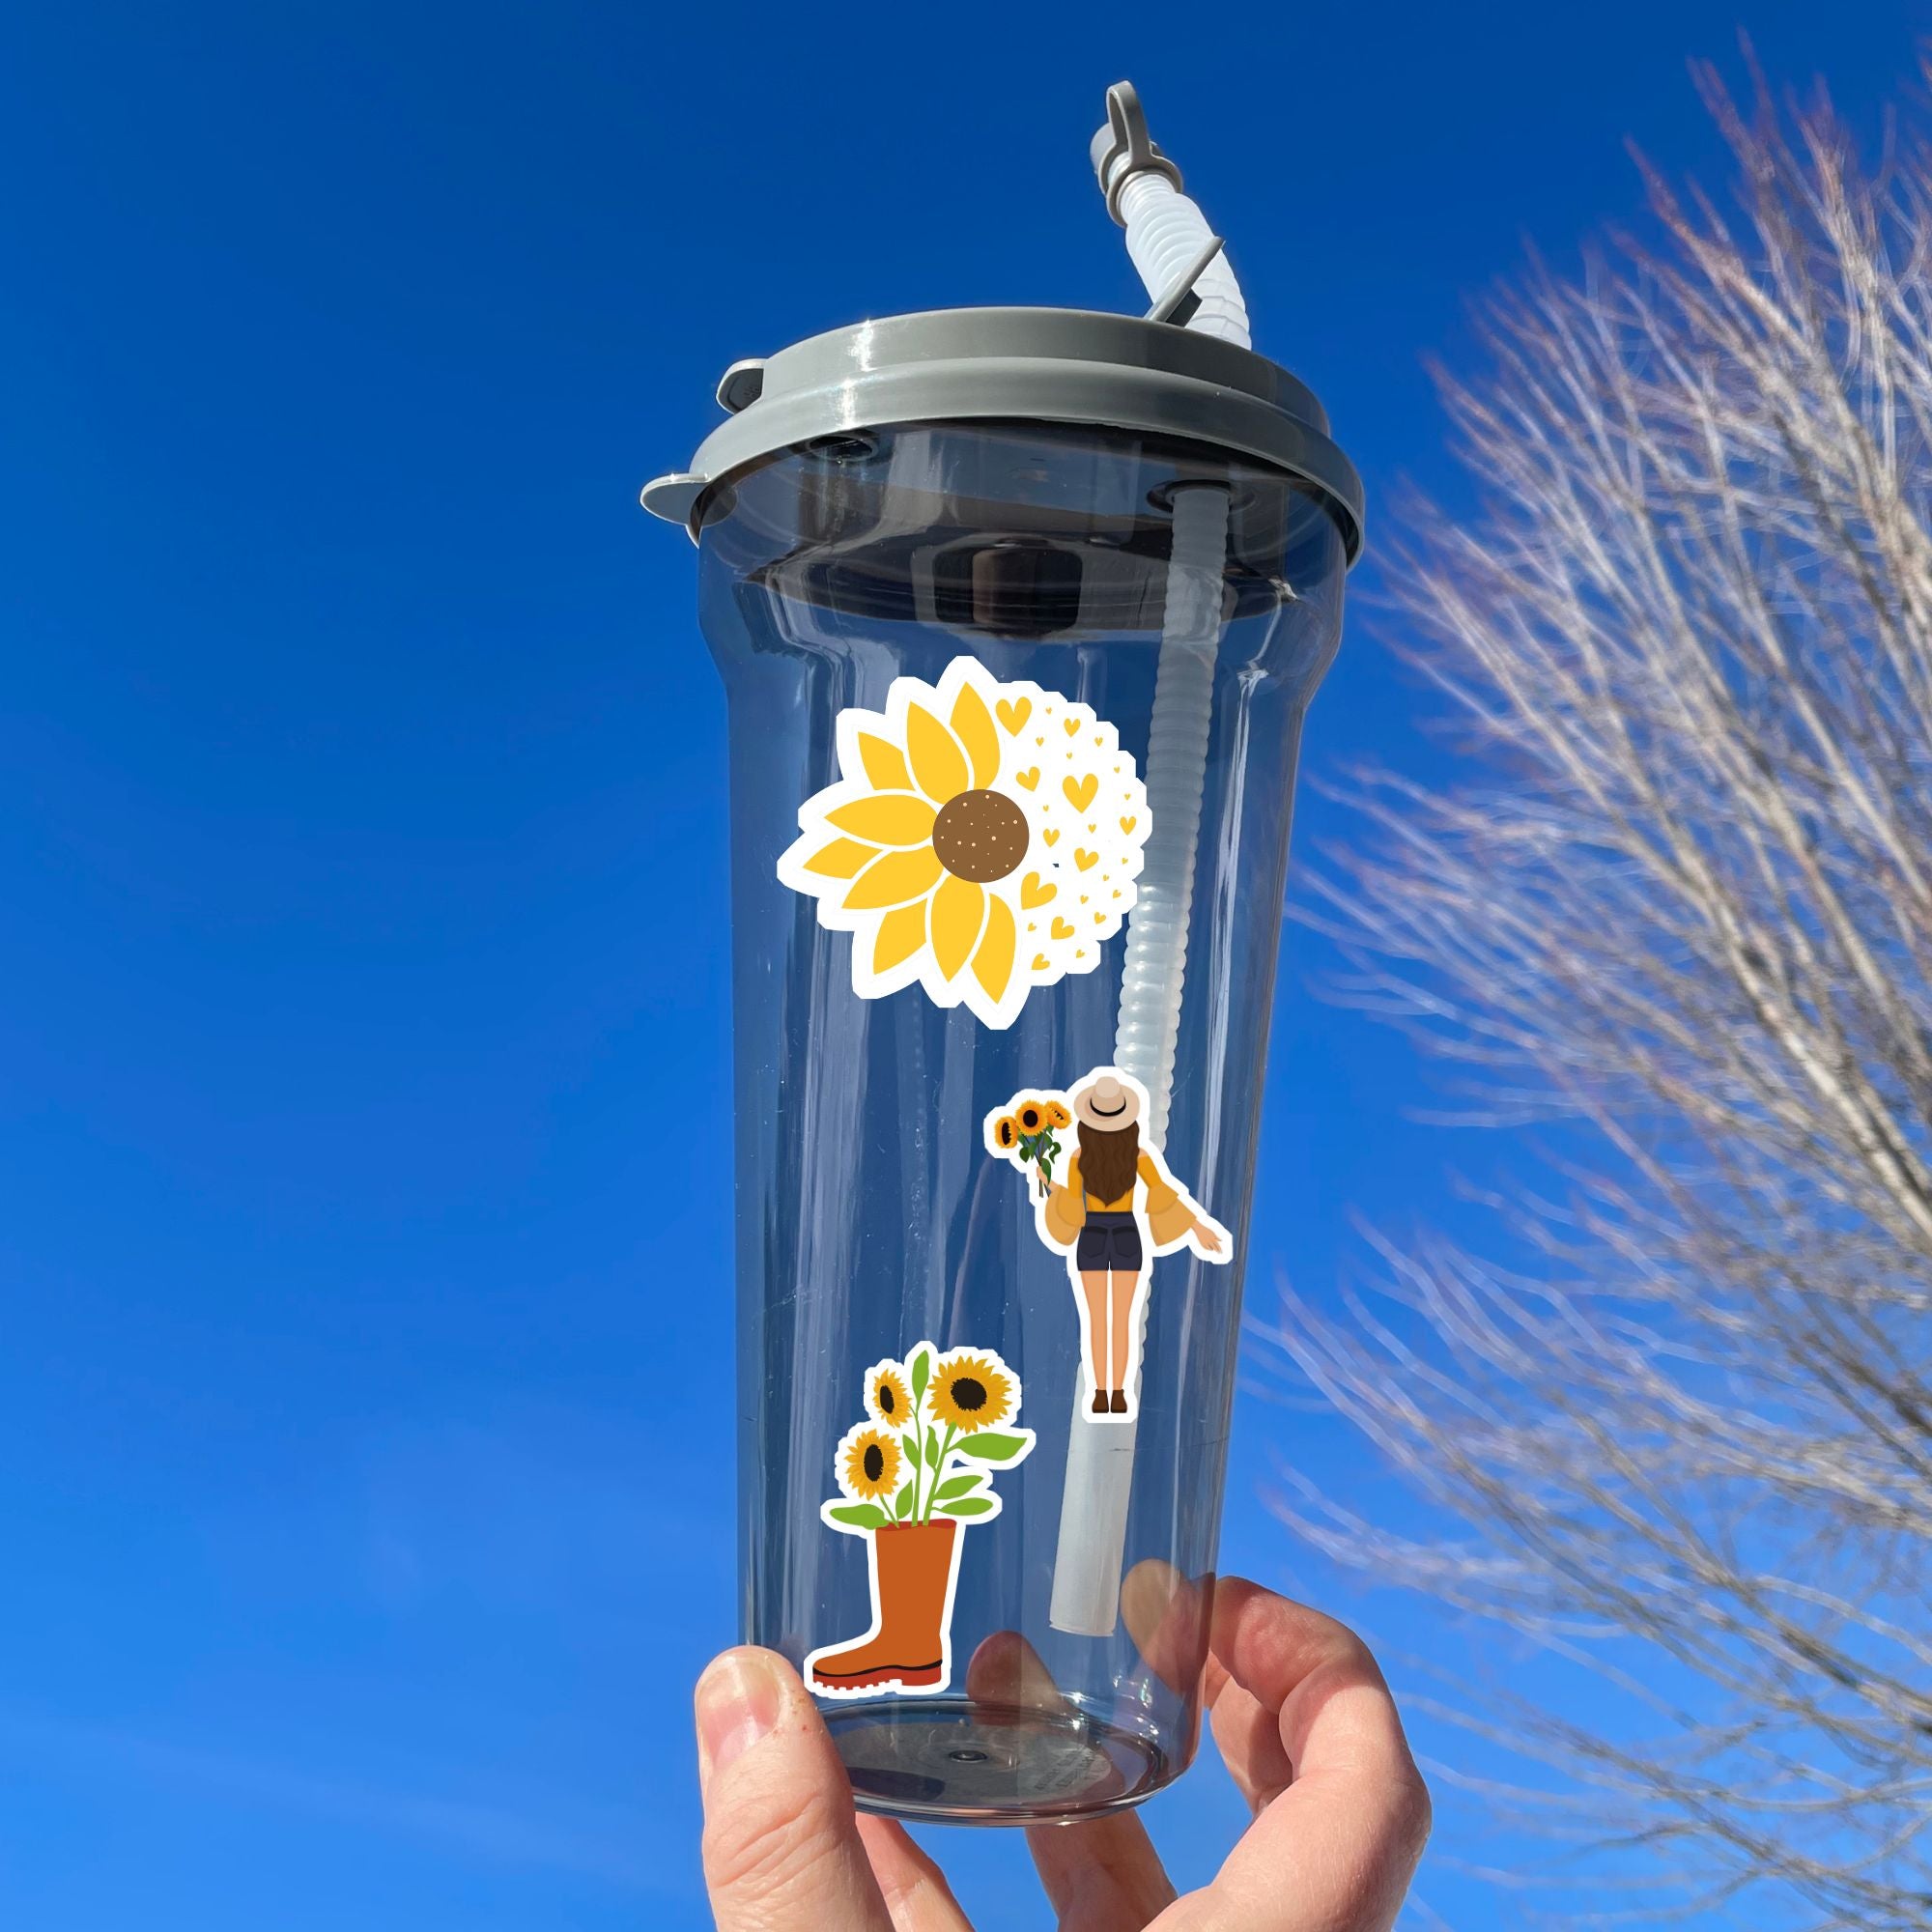 Love sunflowers? Then show it with this sticker sheet! This sticker sheet has nine larger sunflower images. This image shows a water bottle with three stickers - a sunflower morphing into hearts, a woman holding sunflowers, and a boot with sunflowers growing out of it.